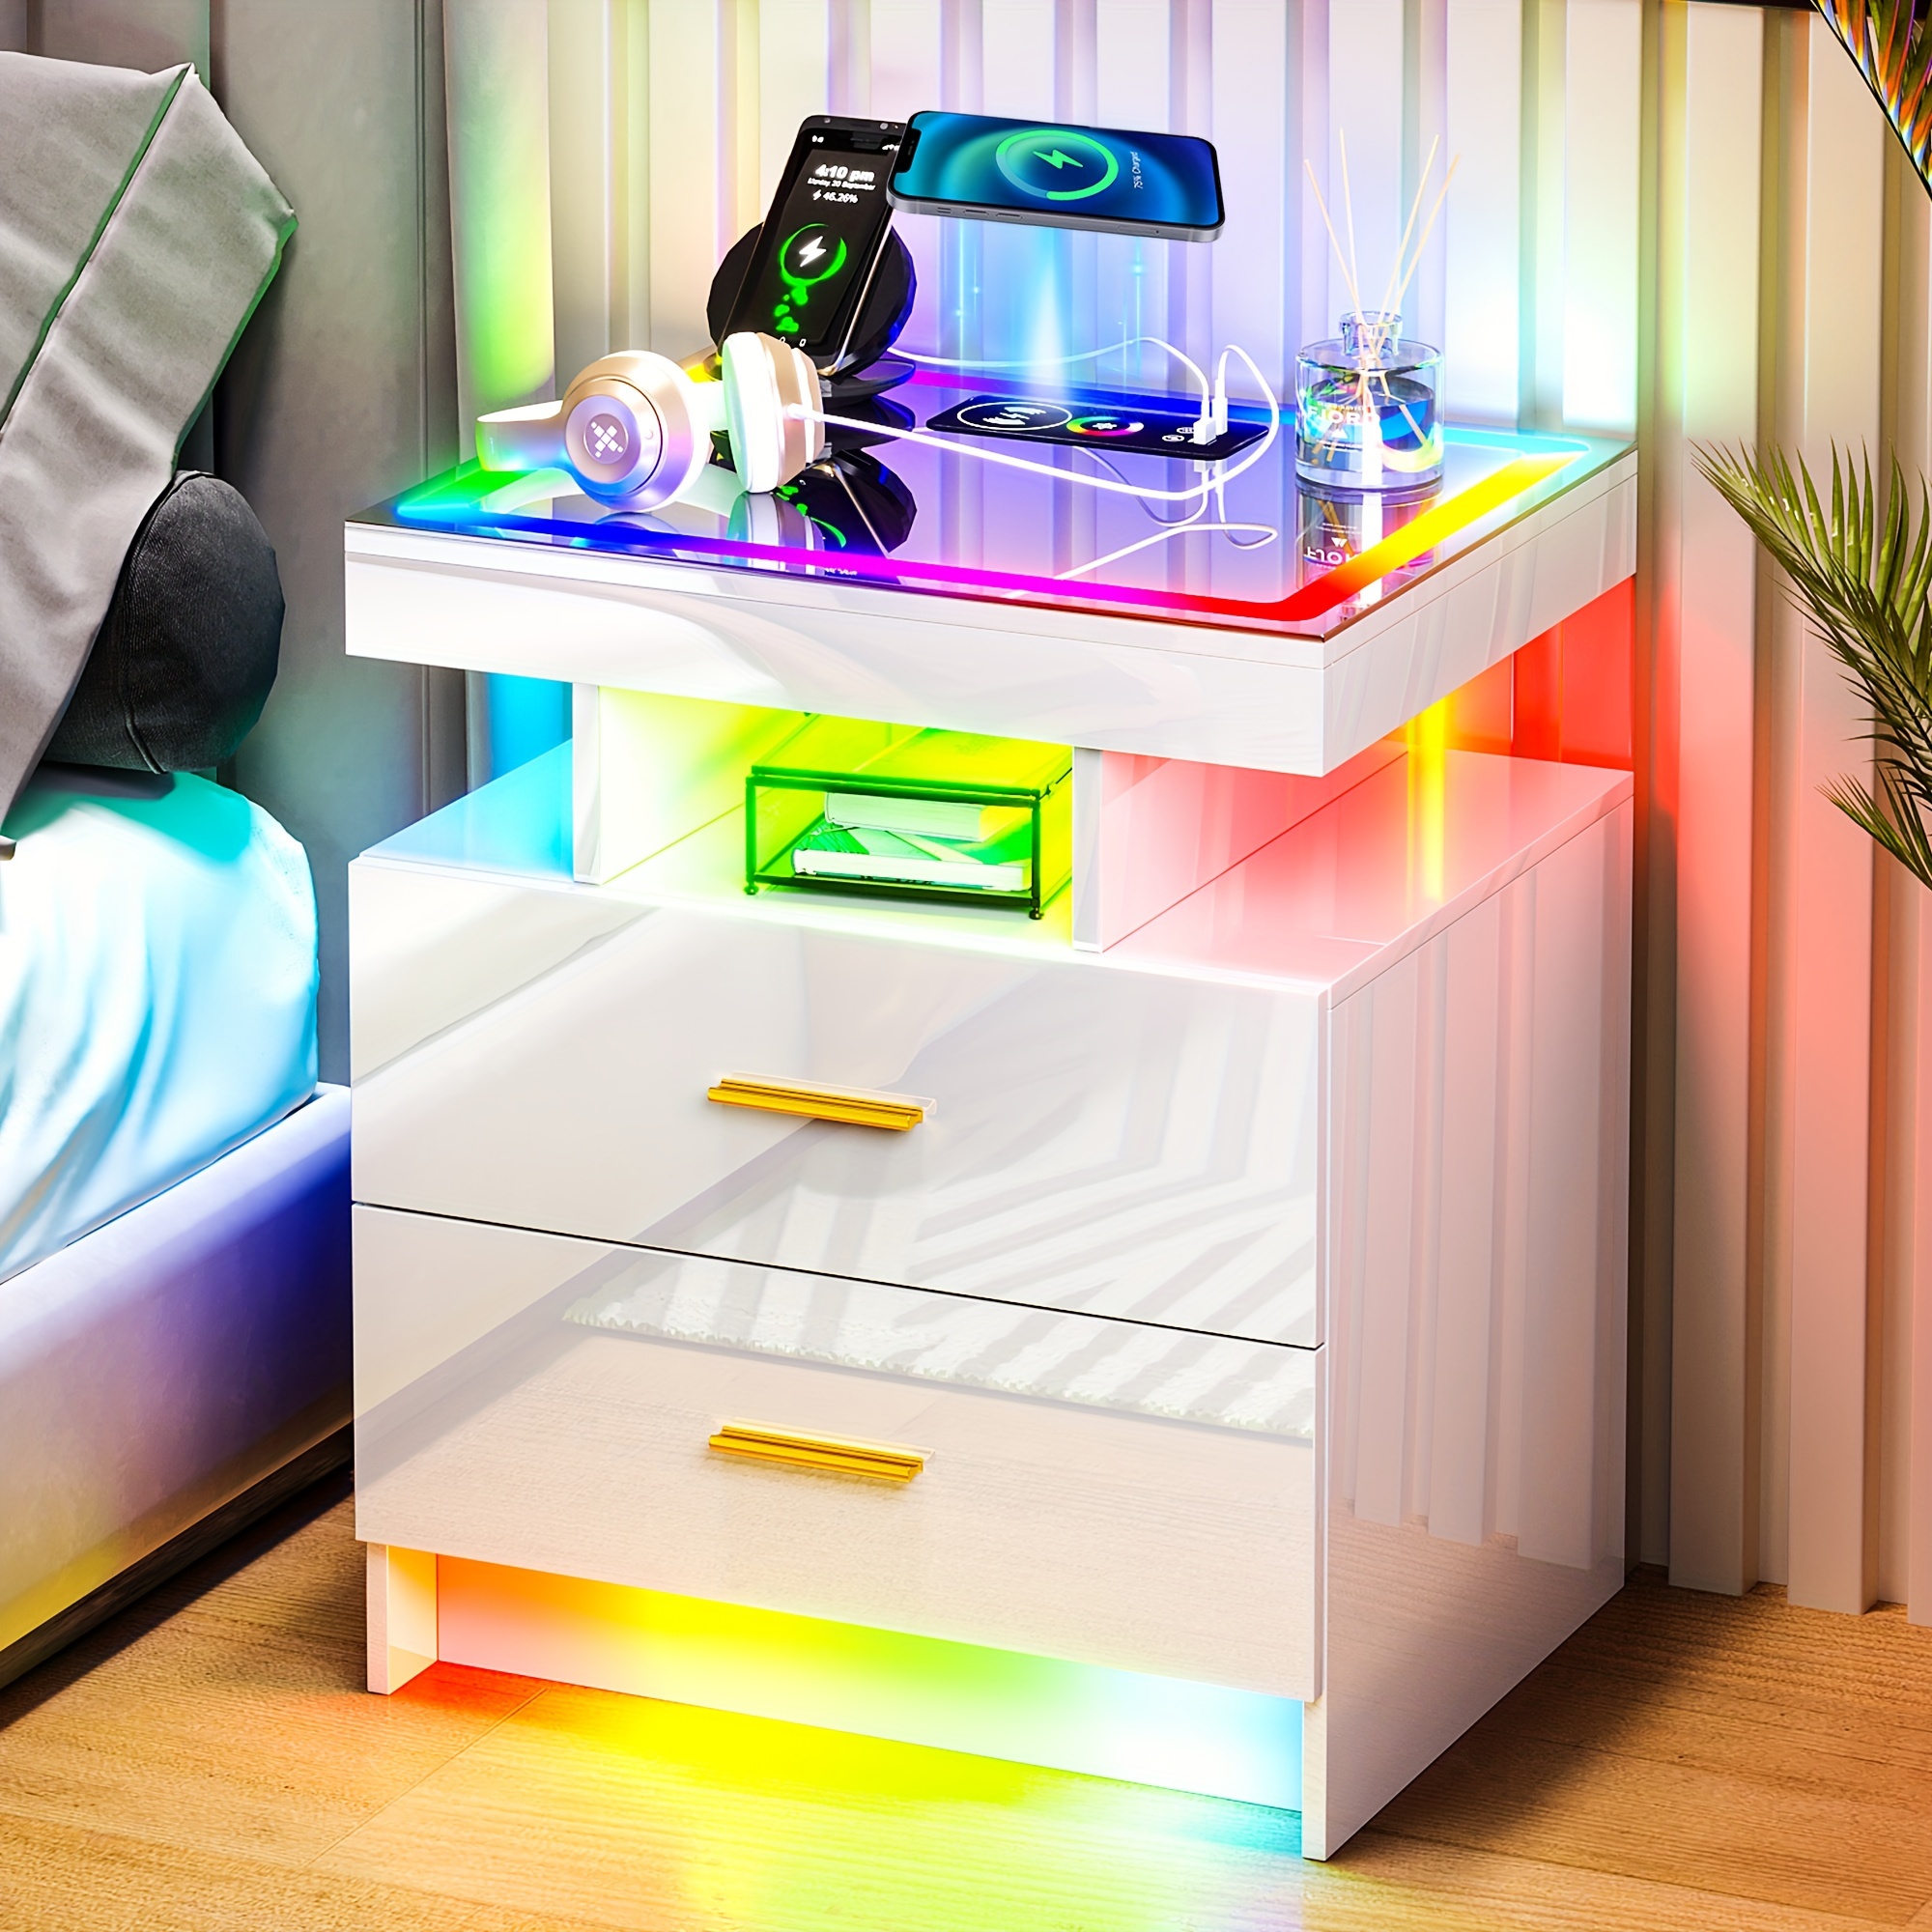 

Hnebc Auto Led Nightstand With Wireless Charging Station, High Gloss Smart Night Stand With Drawer And Rgb Dynamic Lighting, Modern Bedside Tables For Bedroom, End Table